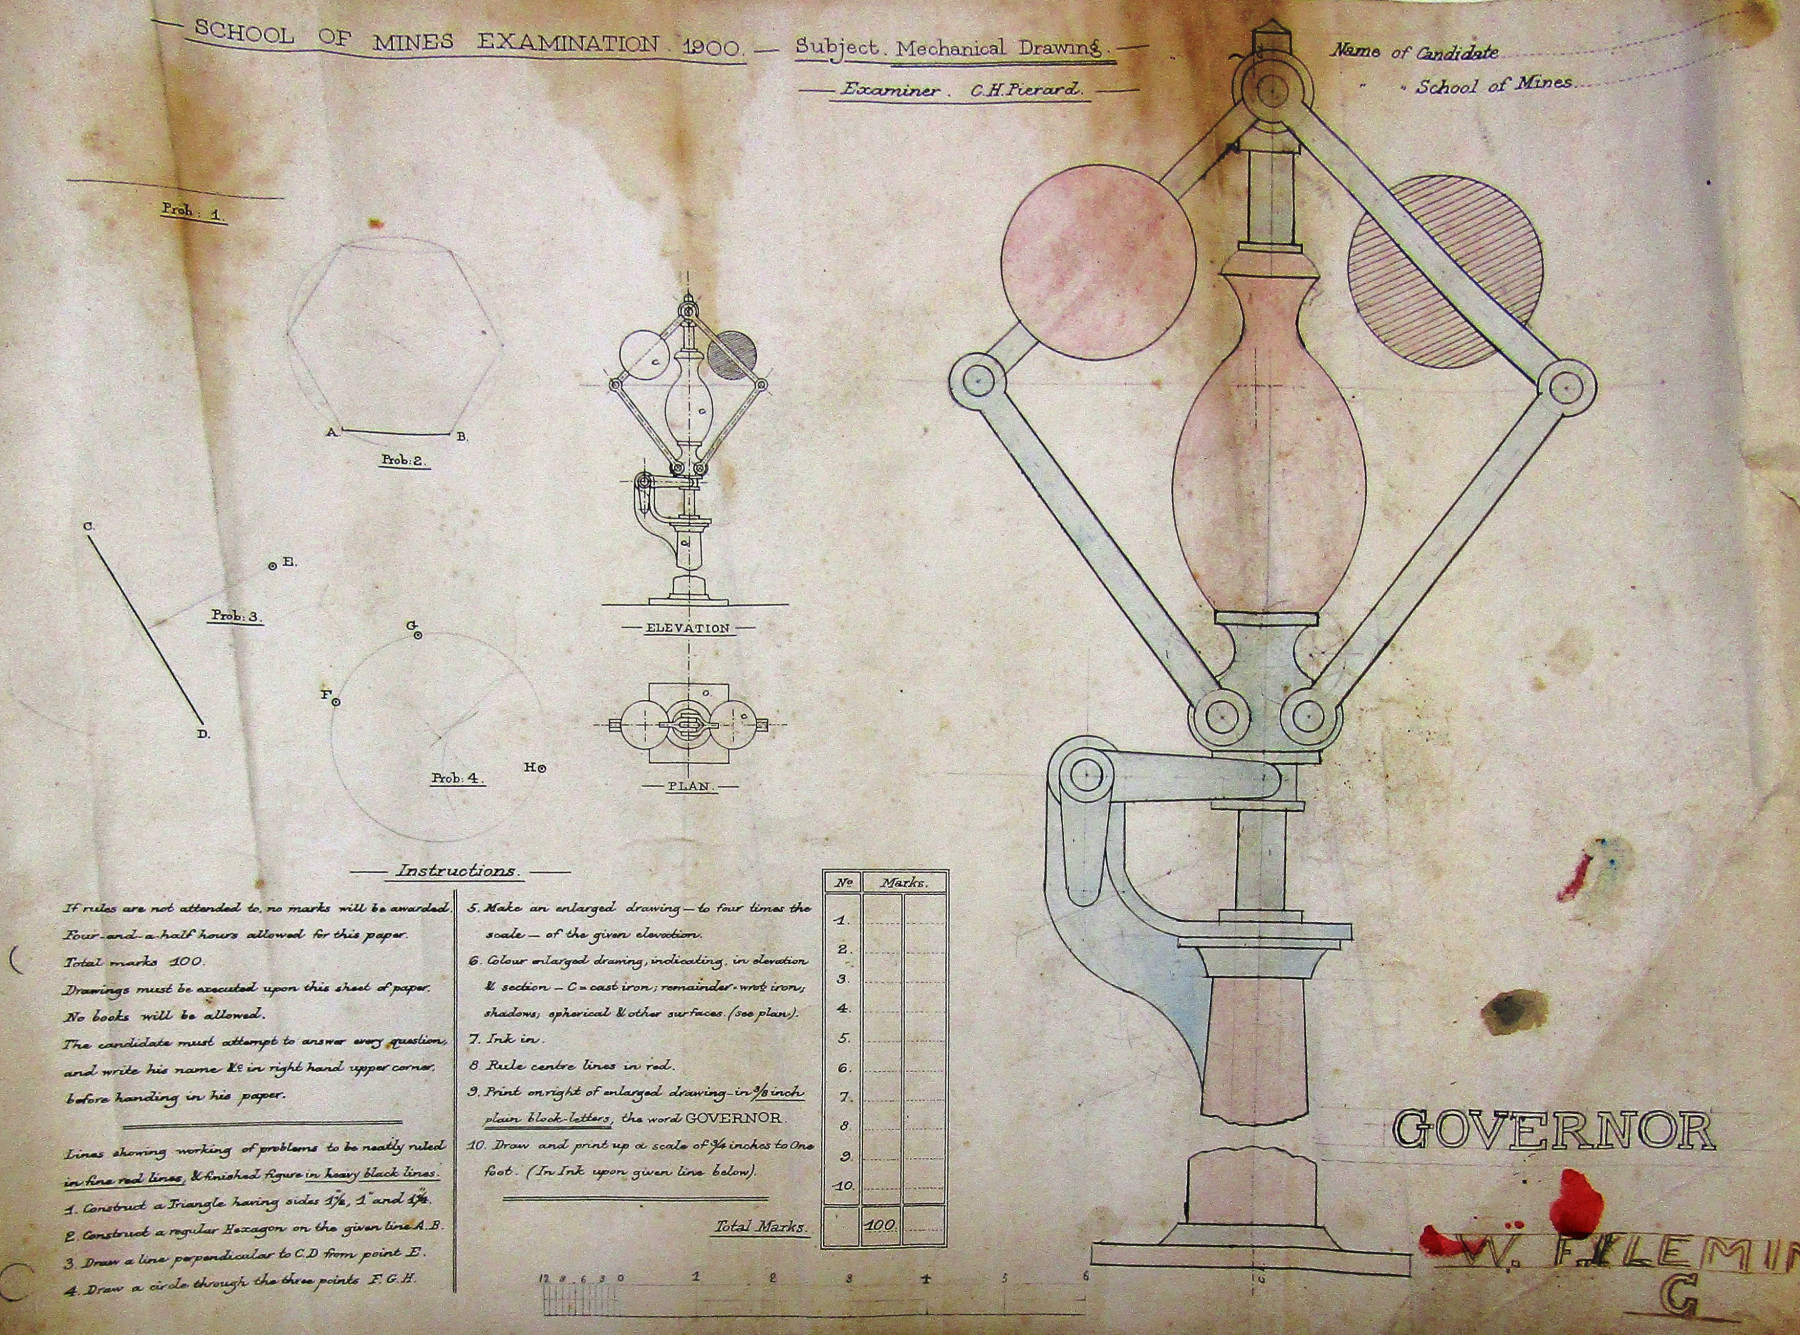 Sepia paper containing a Thames School of Mines exam, including a drawing of equipment.